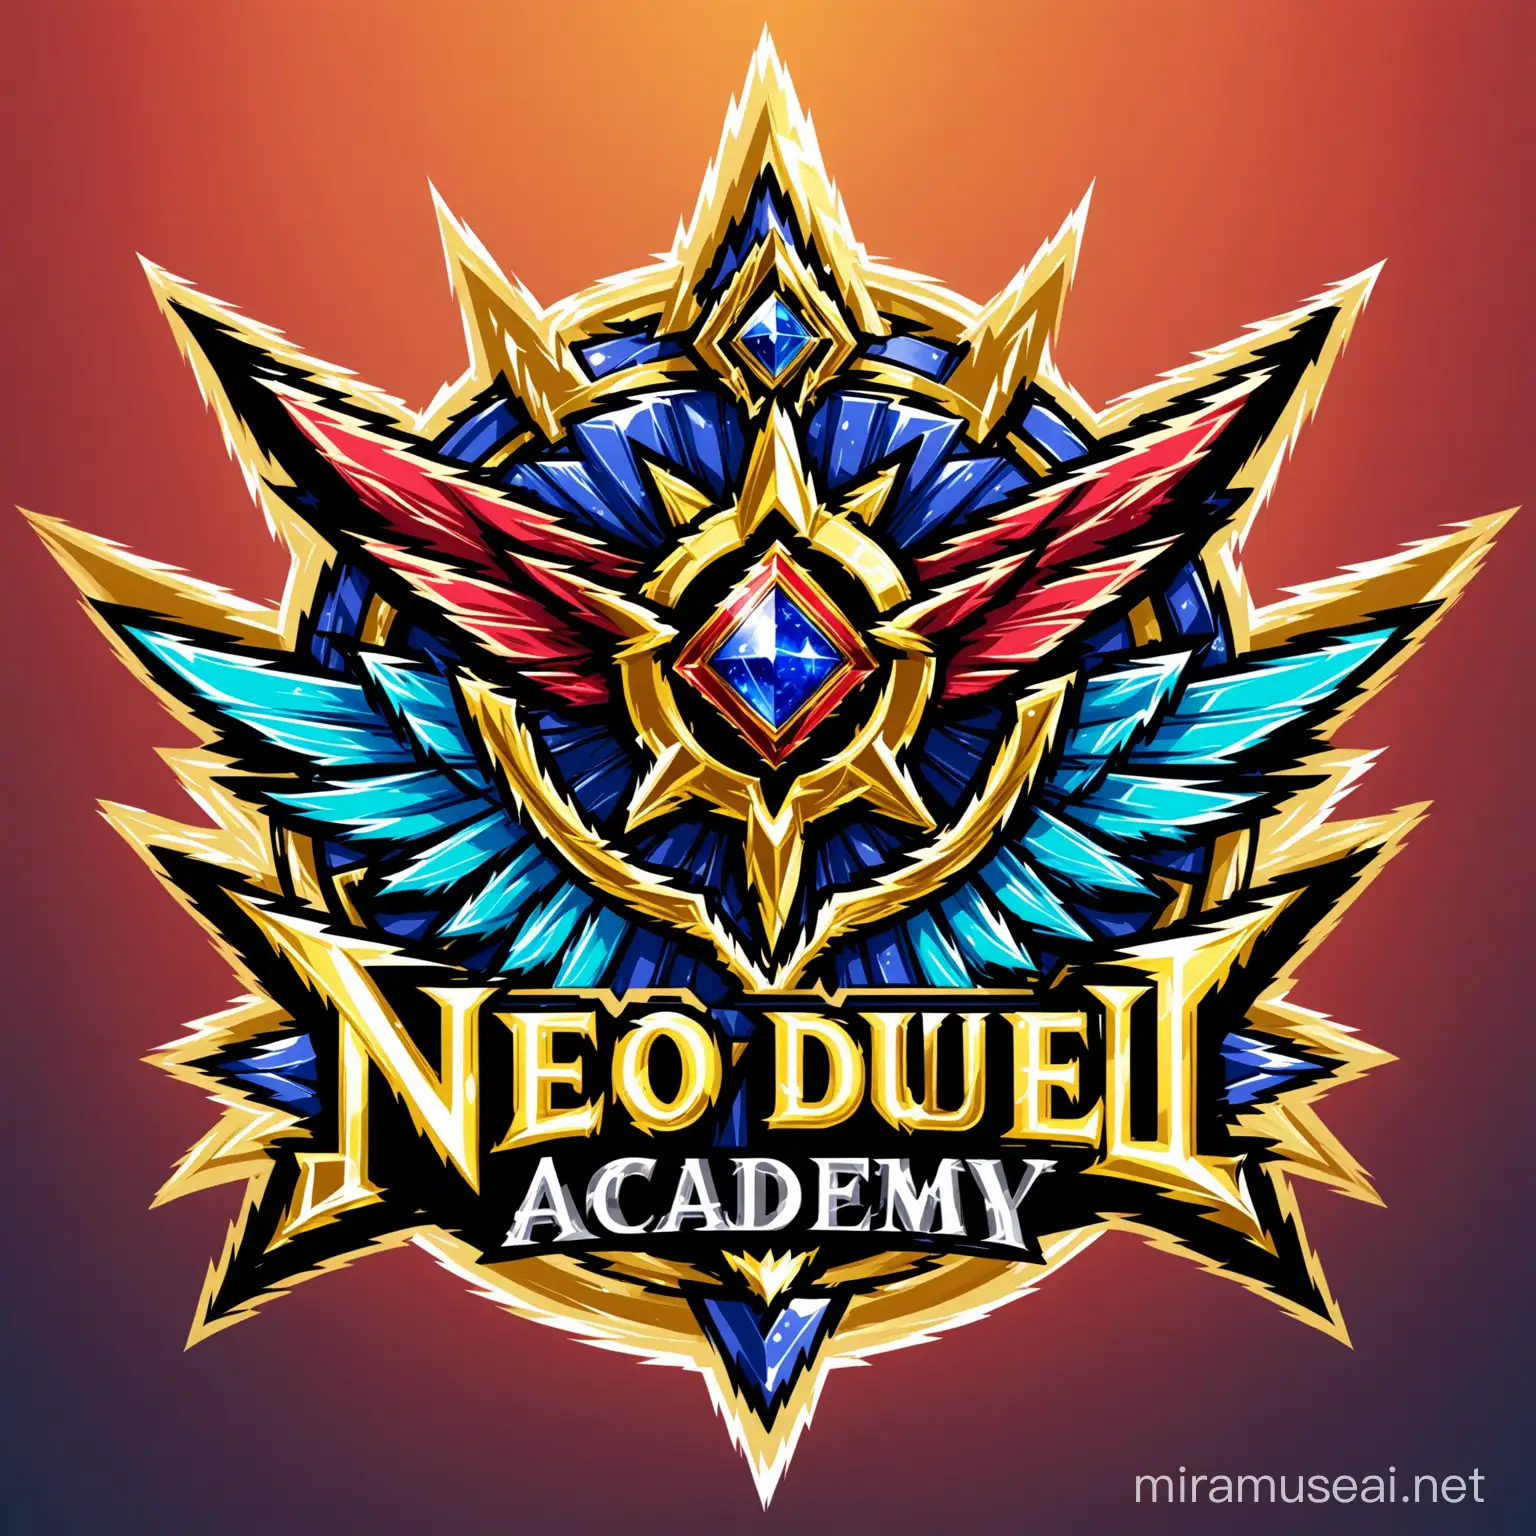 Neo Duel Academy Logo Inspired by YuGiOh Cards